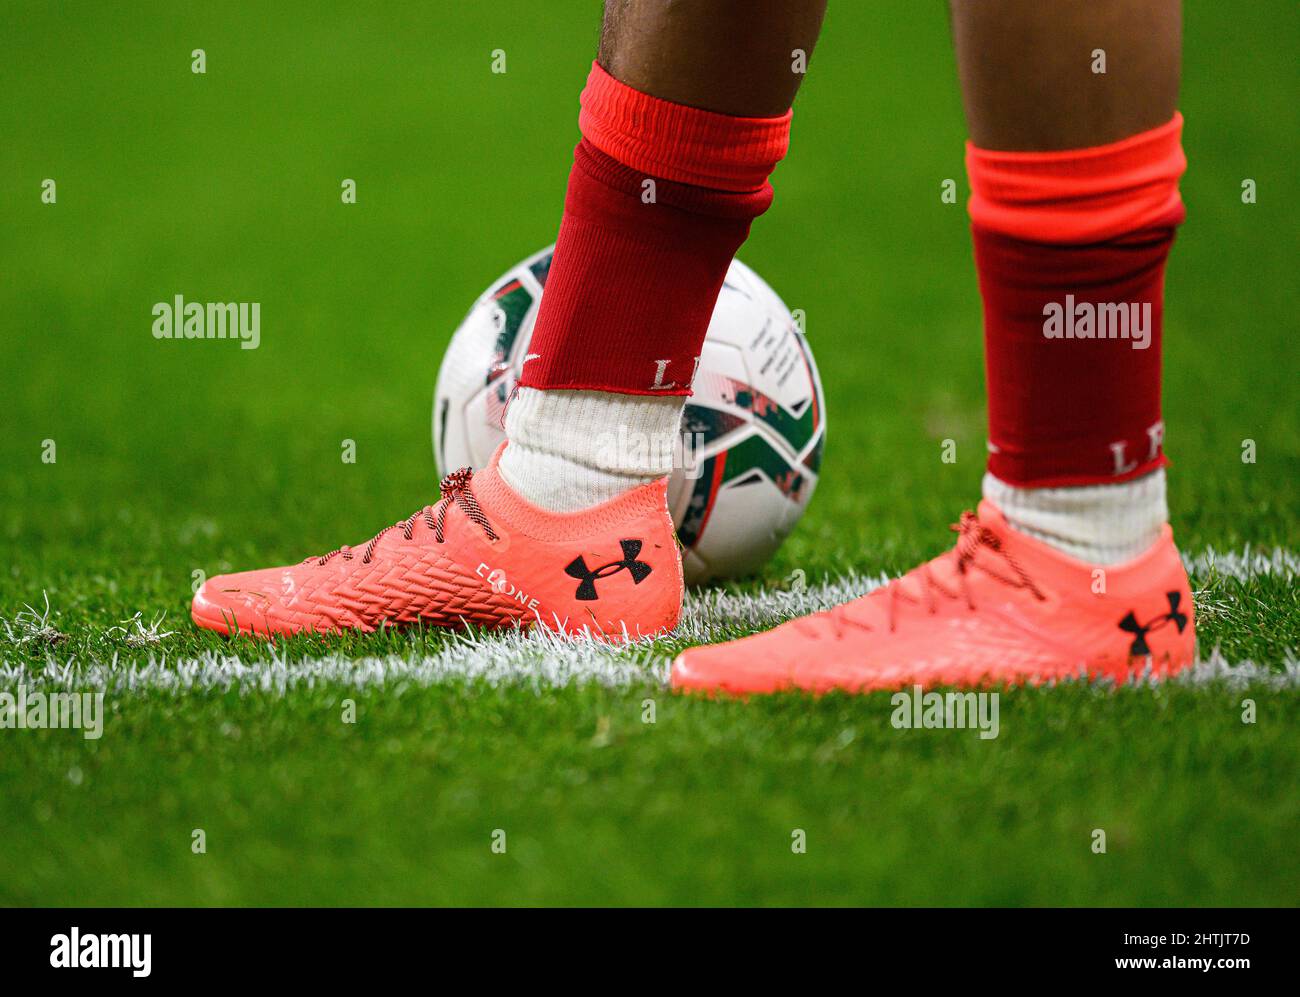 27 February 2022 - Chelsea v Liverpool - Carabao Cup - Final - Wembley  Stadium The Under Amour boots of Liverpool's Trent Alexander-Arnold during  the Carabao Cup Final at Wembley Stadium. Picture